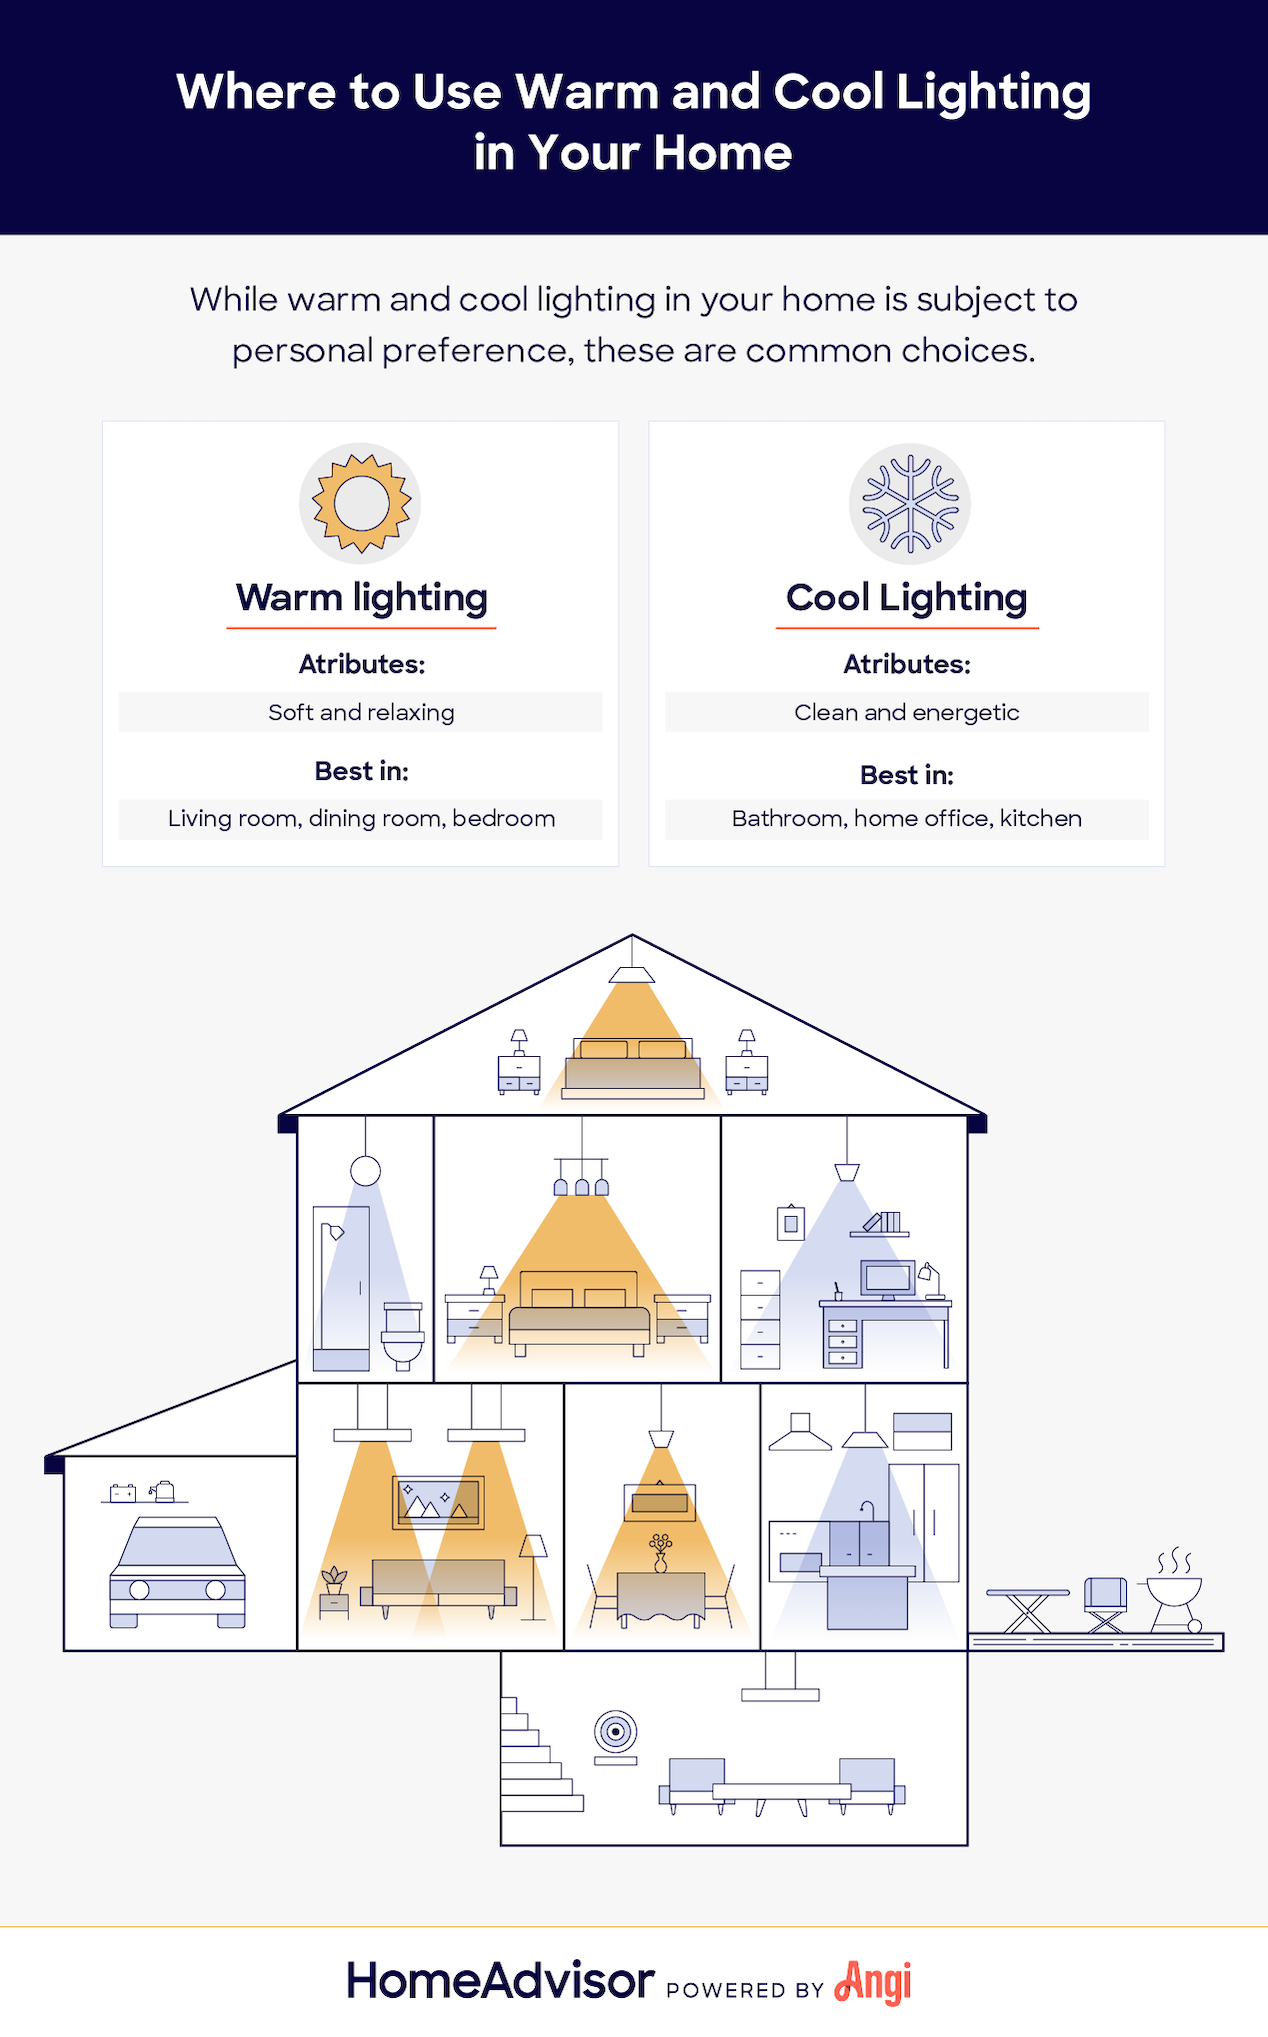 Where to Use Warm and Cool Lighting at Home